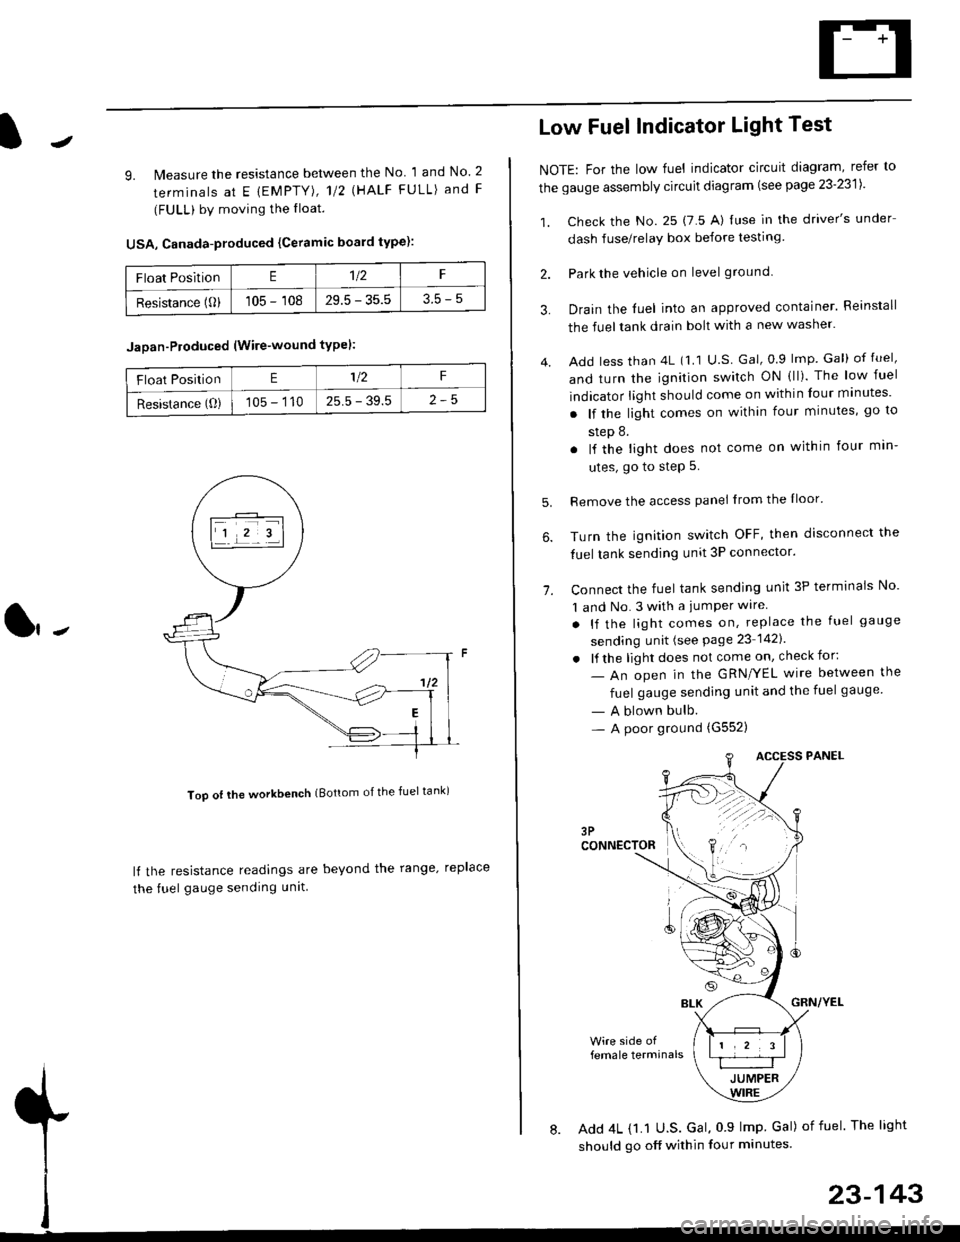 HONDA CIVIC 1998 6.G Workshop Manual J
9. lMeasure the resistance between the No 1 and No. 2
terminals at E {EMPTY), 112 \HALF FULL) and F
(FULL) by moving the lloat.
USA, Canada-produced {Ceramic board type):
Too ot lhe workbench (Botto